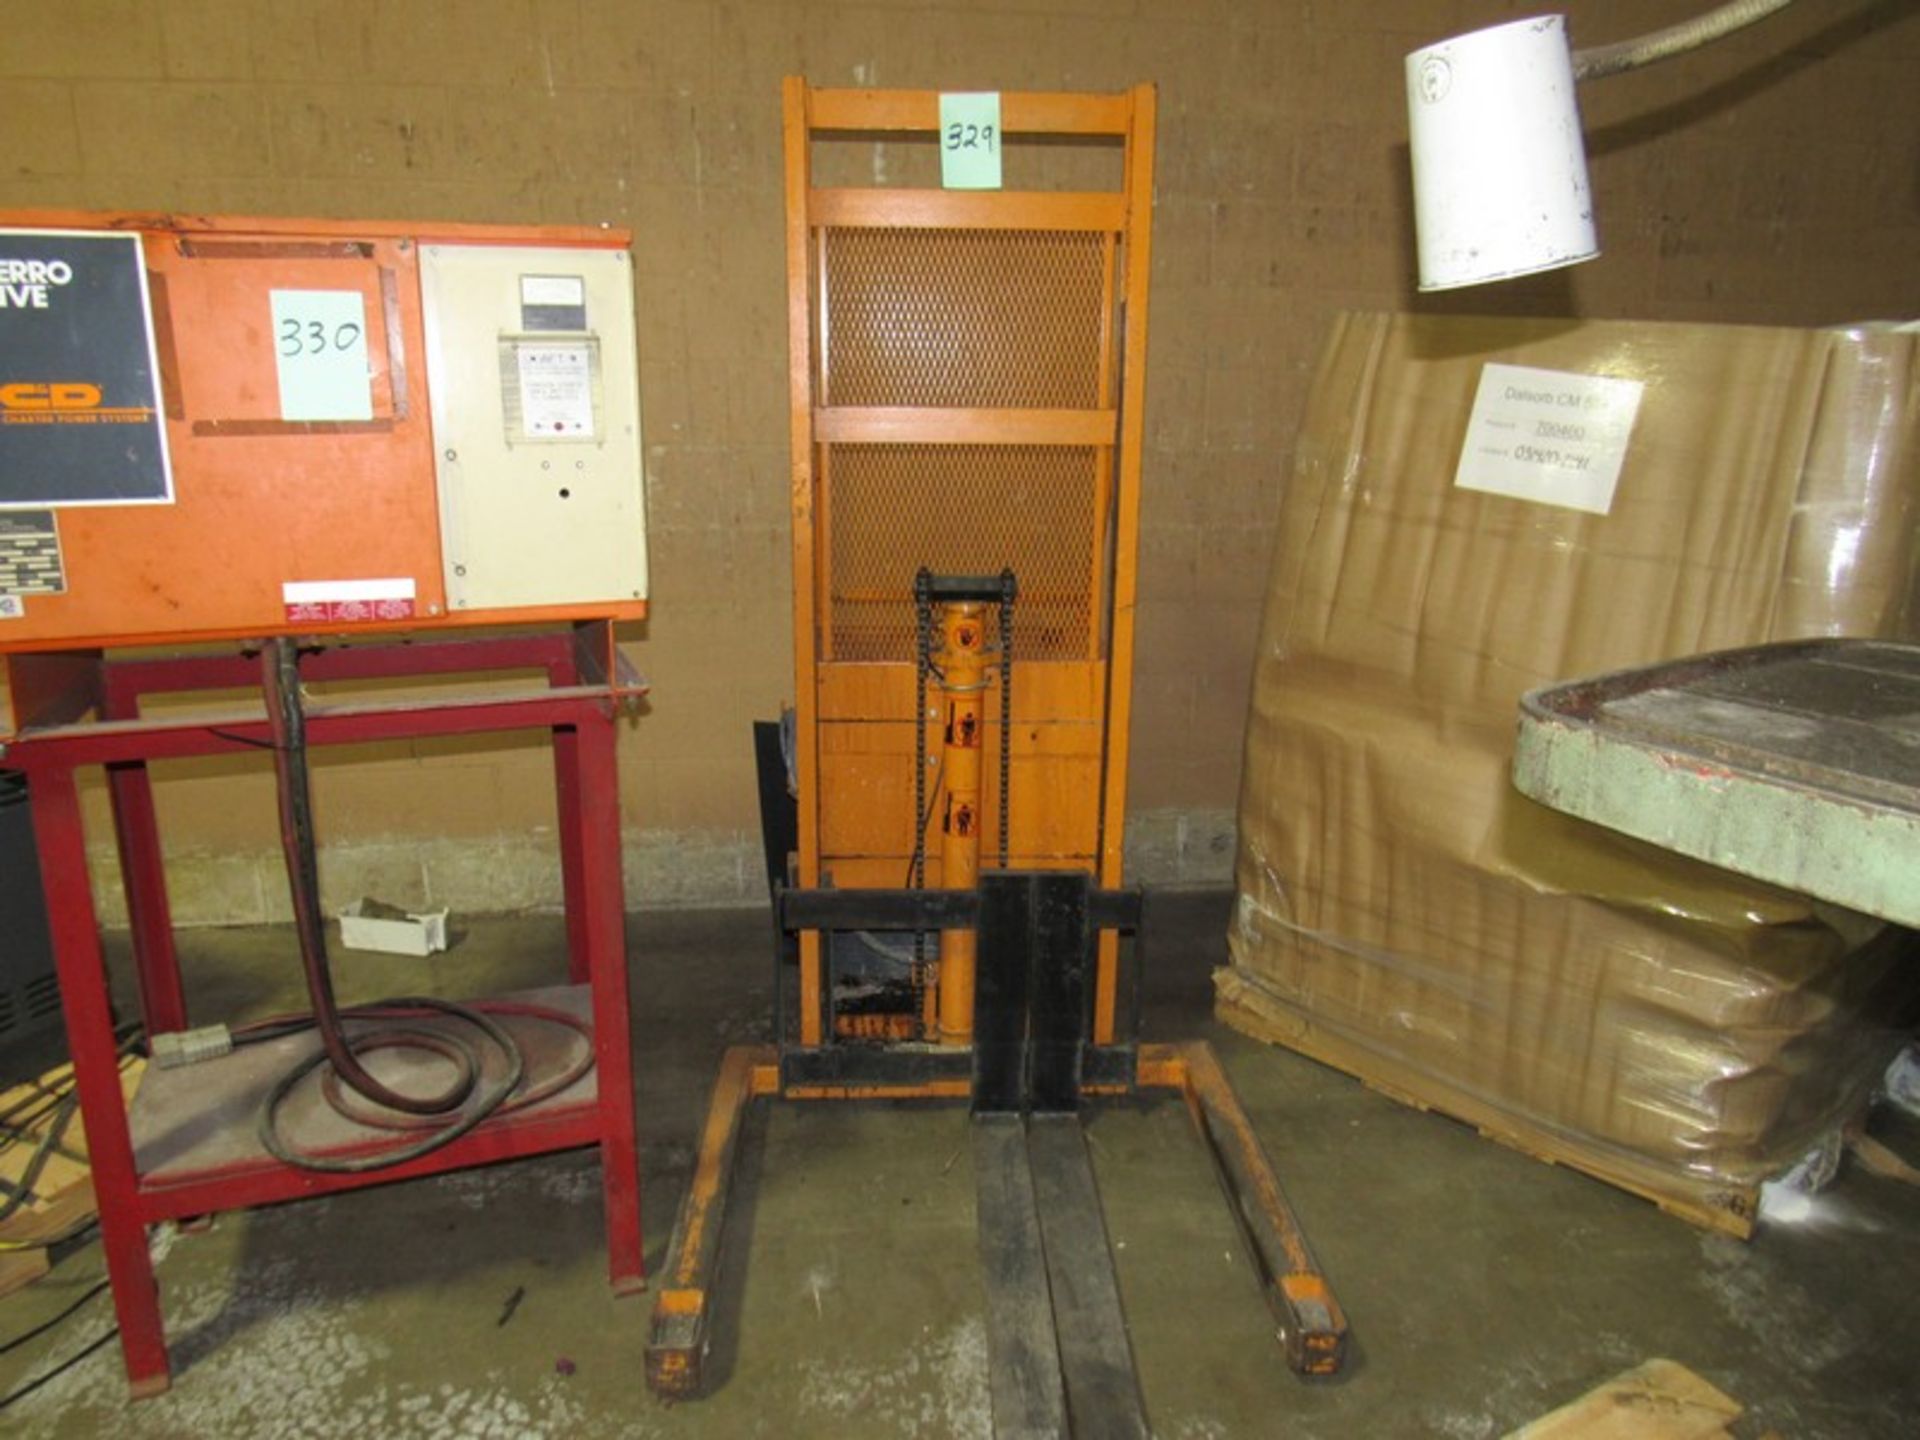 Rol-Lift Floor Lift 2000 Pound Capacity, Battery Operated Hydraulic Lift, Model #M2420855MD36,